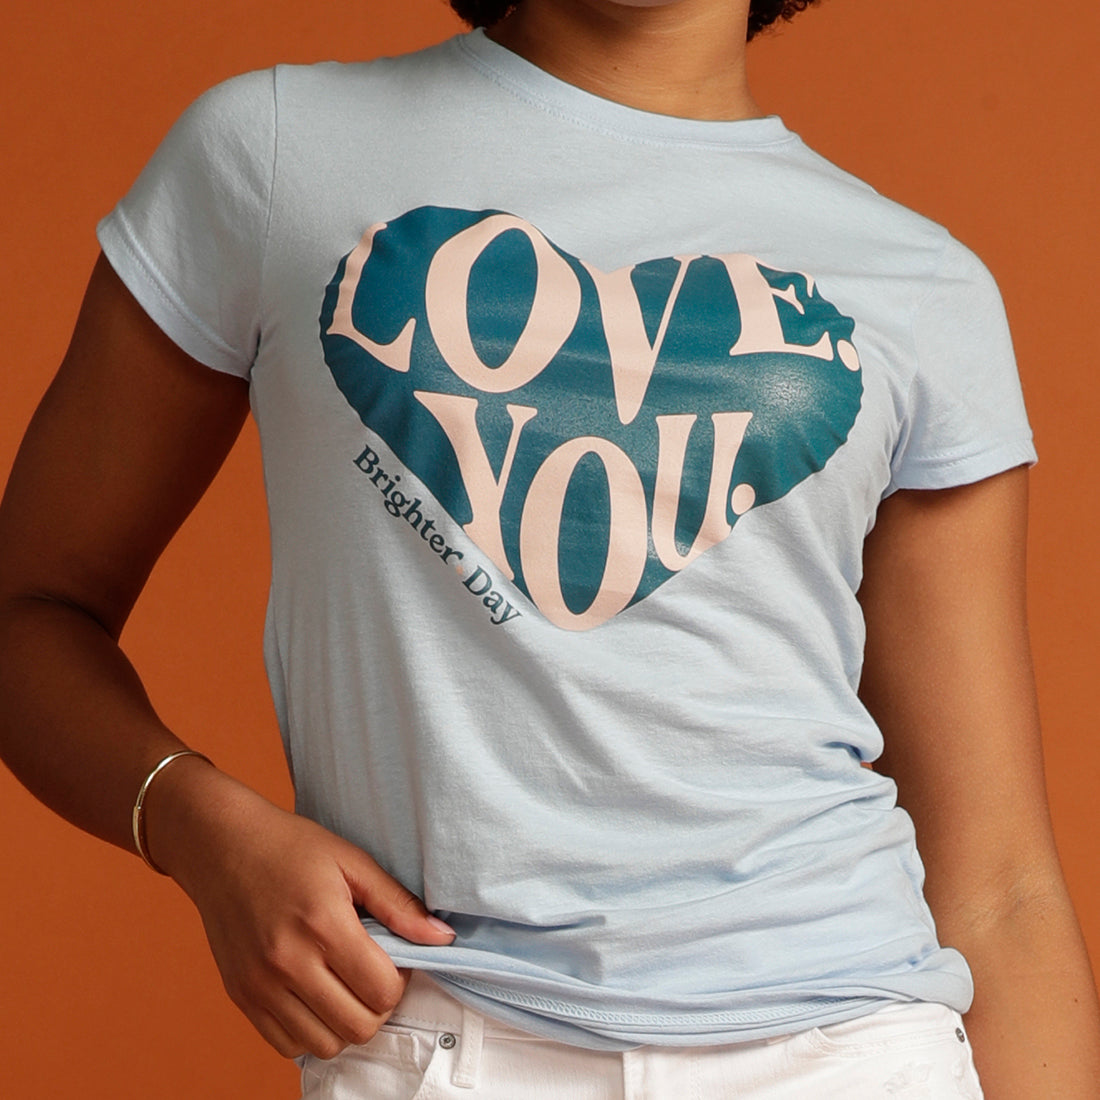 Close up blue Love You Brighter Day tee